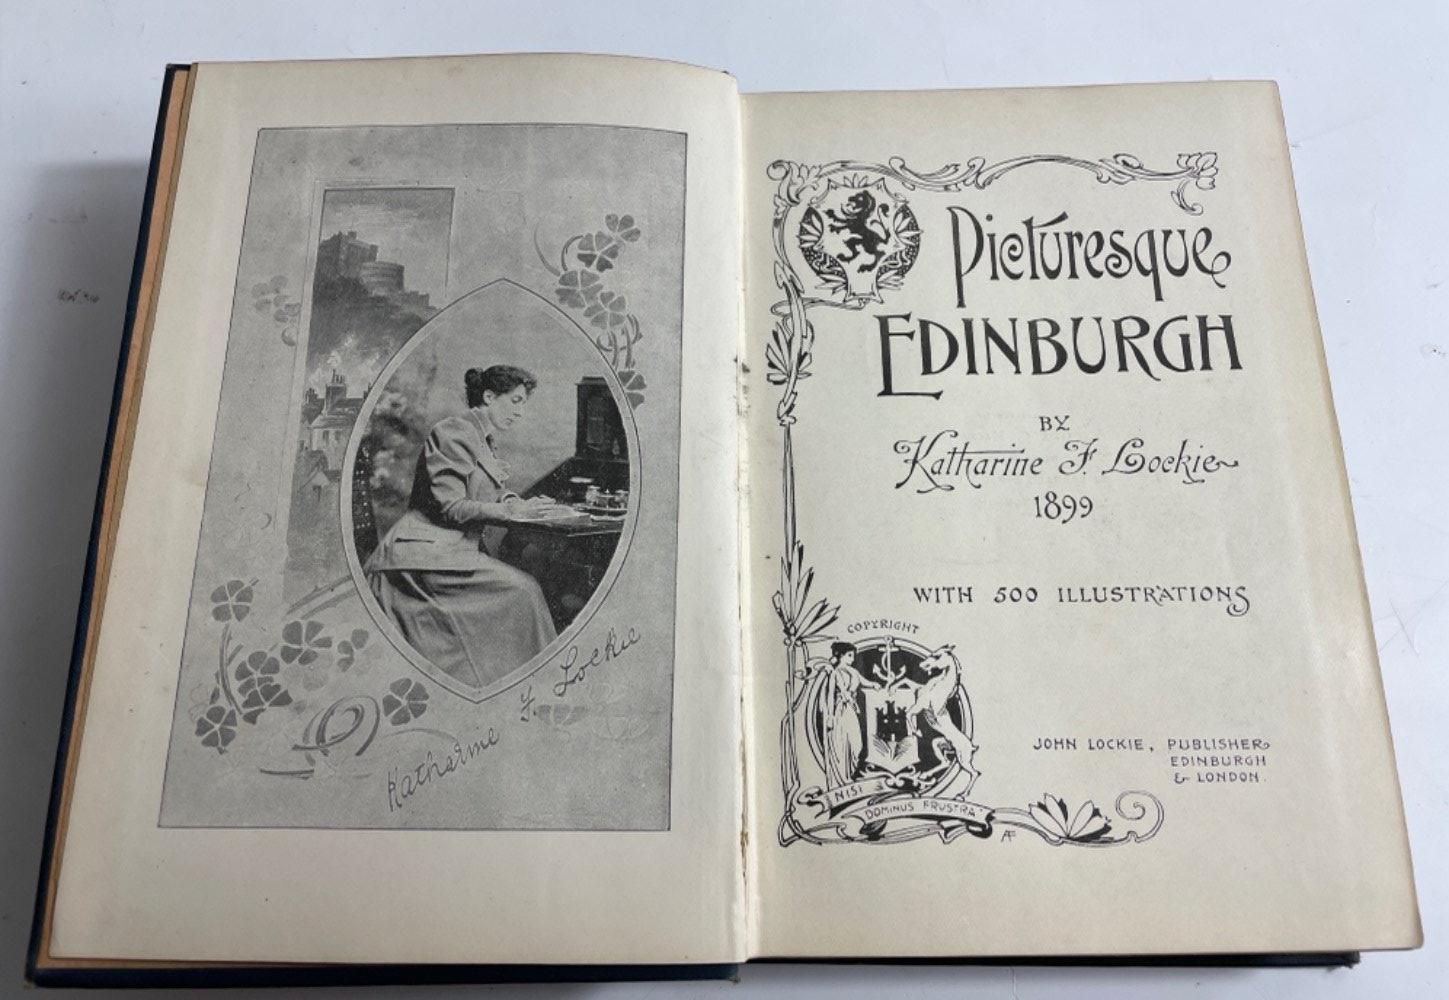 Beautiful 1st Edn 1899 Book “Picturesque Edinburgh” by Katharine F Lockie 500 Illustrations - Image 2 of 2